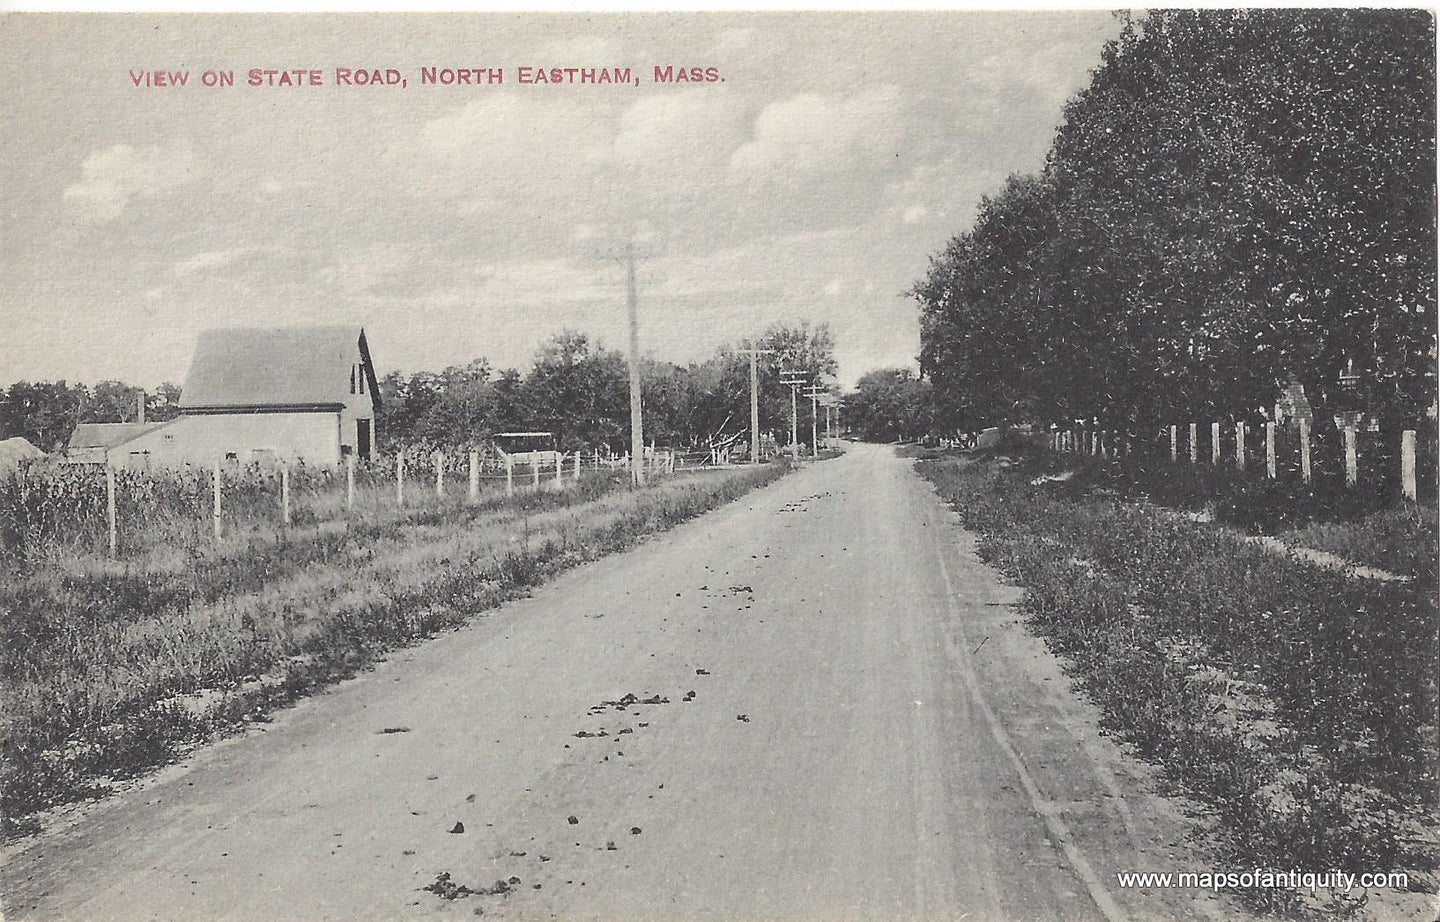 Genuine-Antique-Post-Card-View-On-State-Road-North-Eastham-Mass-Antique-Postcard-1907-1914-S-F-Brackett-Maps-Of-Antiquity